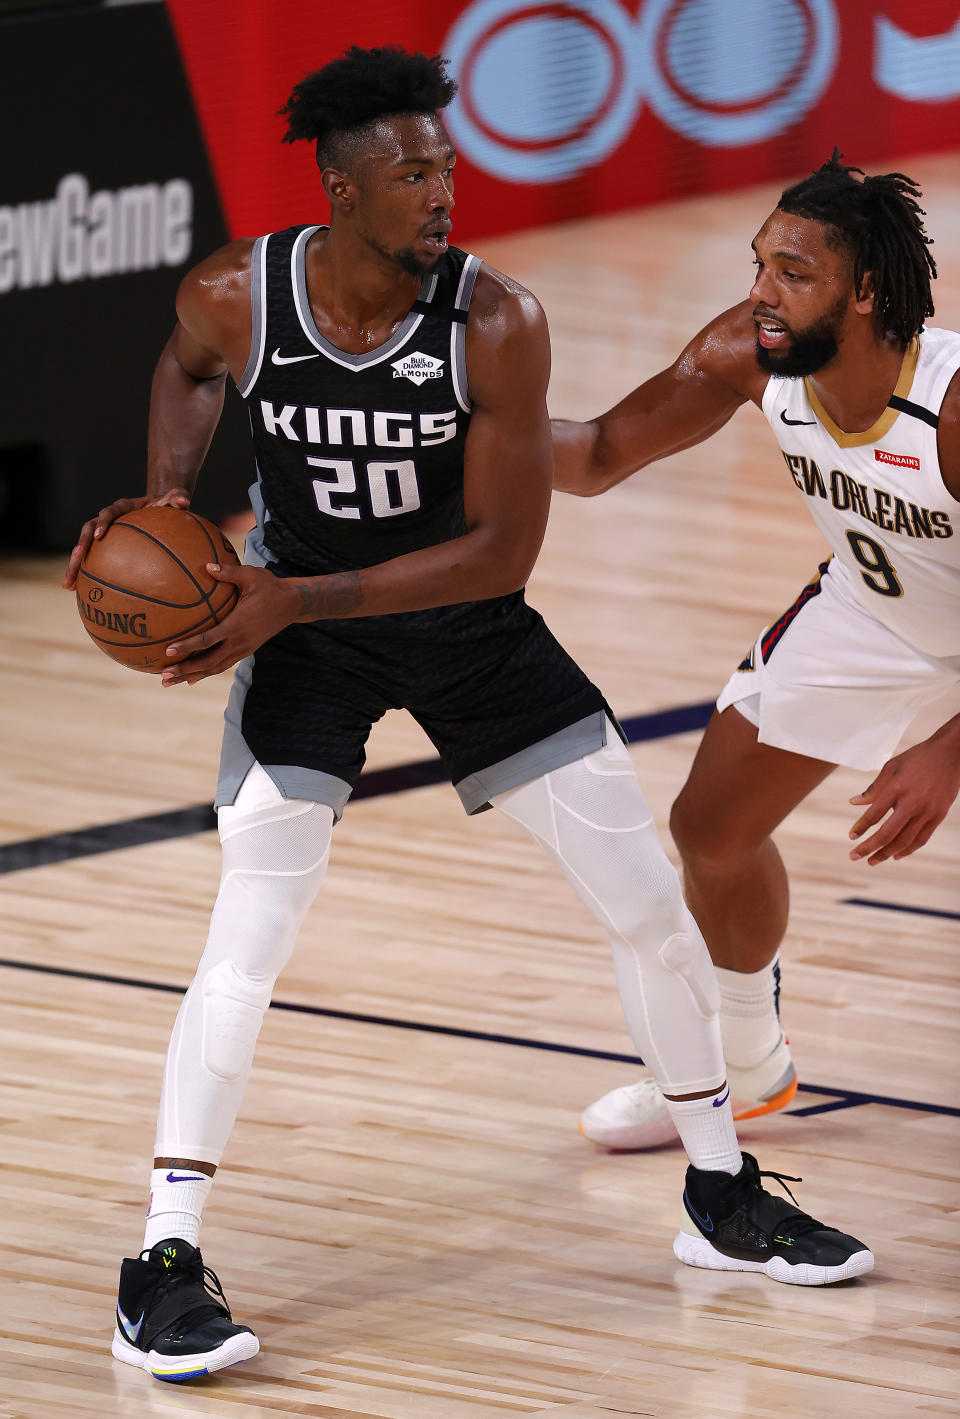 Sacramento Kings' Harry Giles III, left, is defended by New Orleans Pelicans' Jahlil Okafor during the second quarter of an NBA basketball game Tuesday, Aug. 11, 2020, in Lake Buena Vista, Fla. (Mike Ehrmann/Pool Photo via AP)